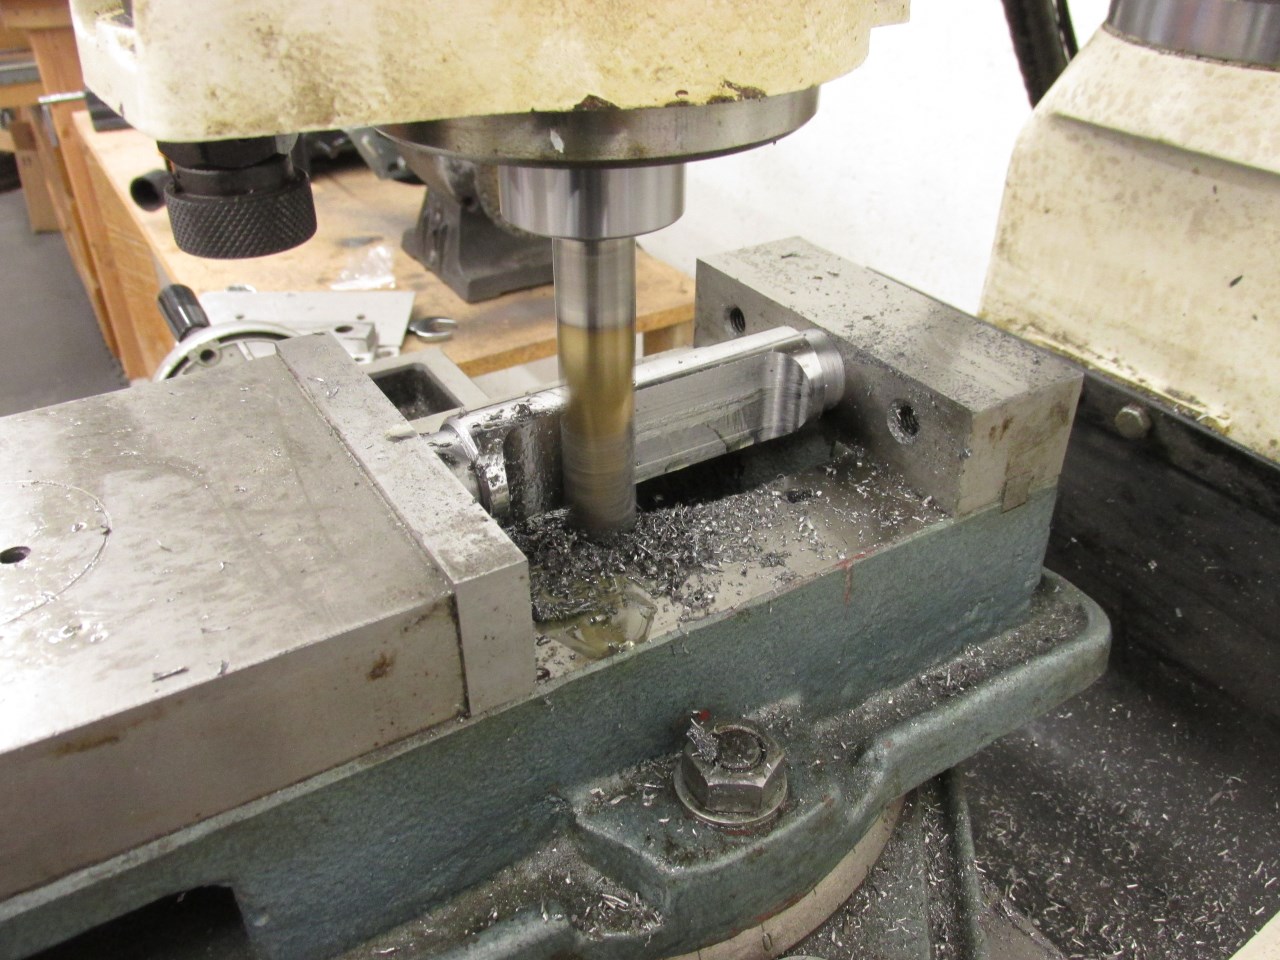 Machining control arm tube ends on mill